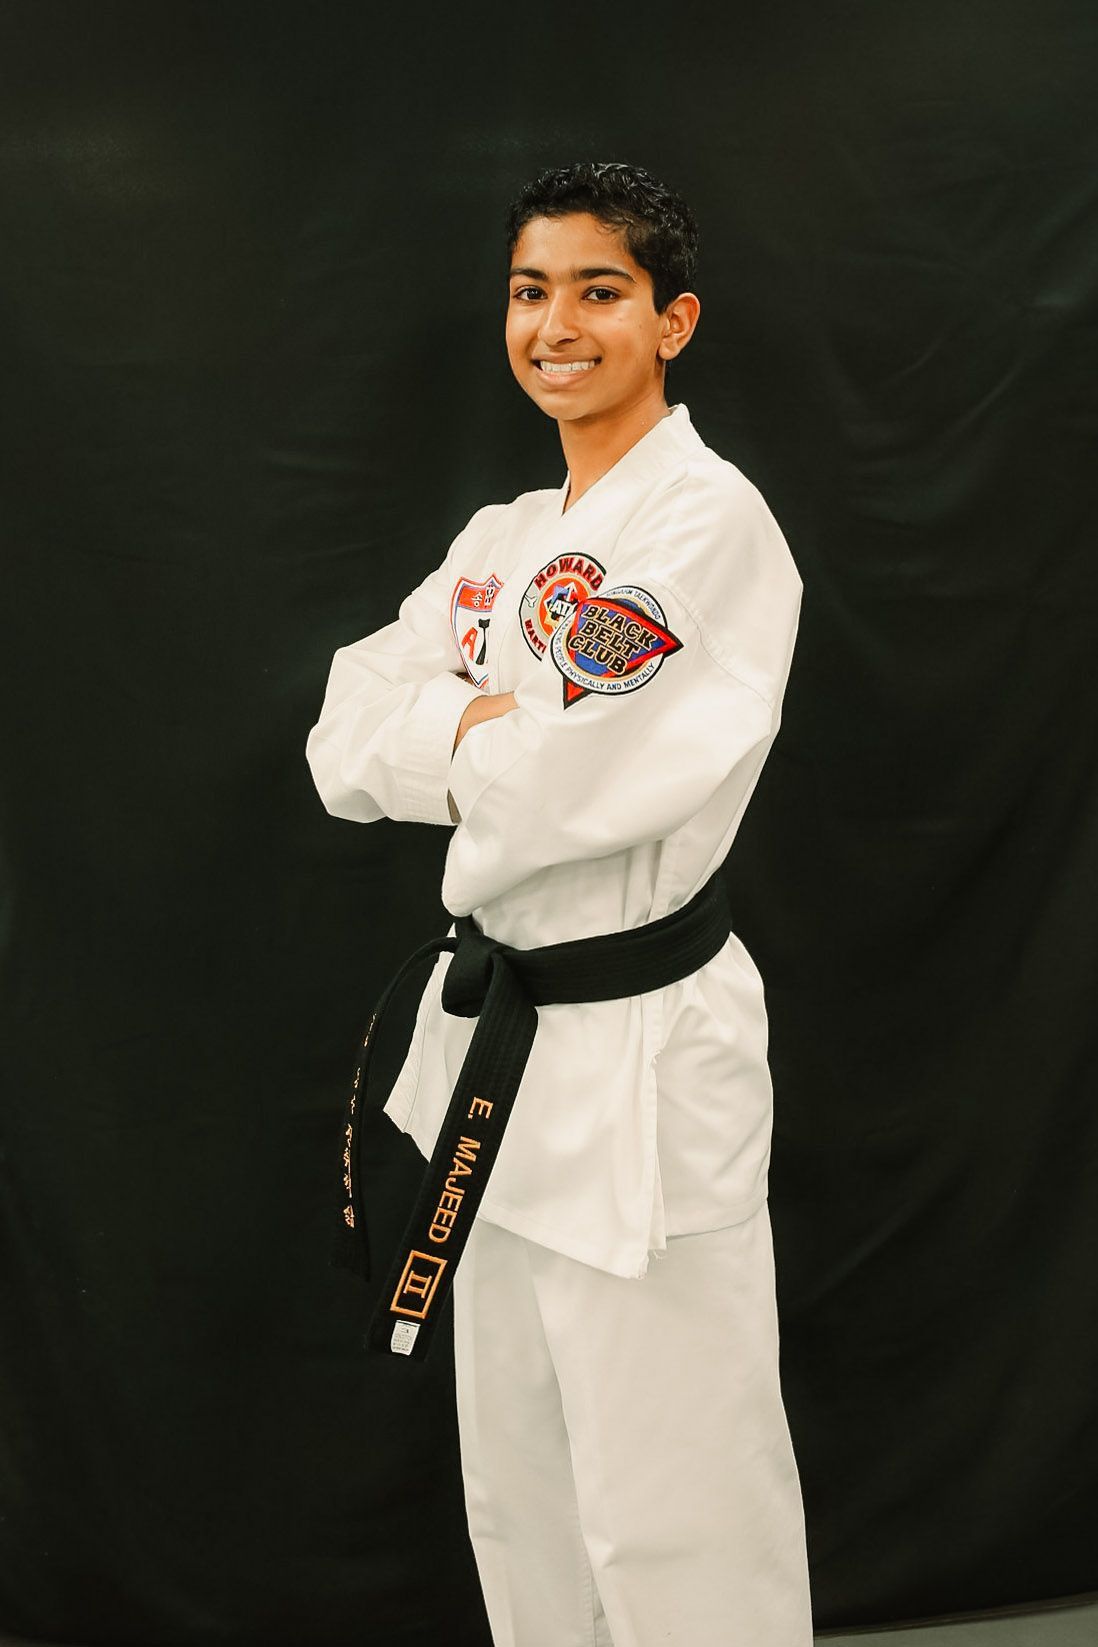 A young boy in a karate uniform is standing with his arms crossed.